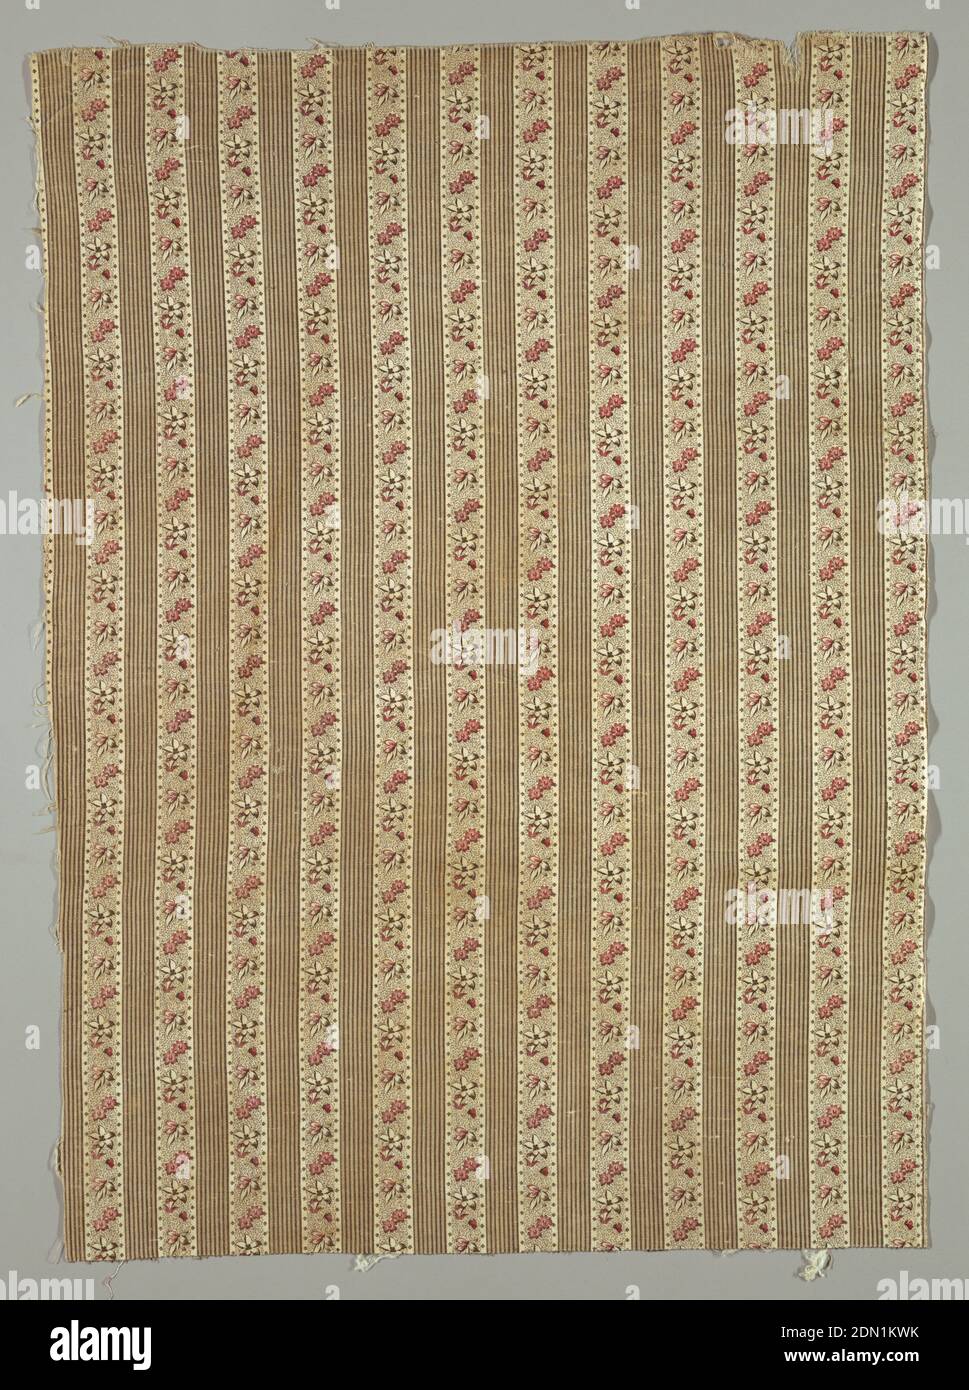 Samples, Medium: cotton Technique: printed, Four samples patterned by alternate stripes of the following: narrow brown stripes, herringbone stripes and stripes of flowers and leaves of brown and red on a vermicular ground edged with very small brown flowers., England or USA, 19th century, printed, dyed & painted textiles, Samples Stock Photo